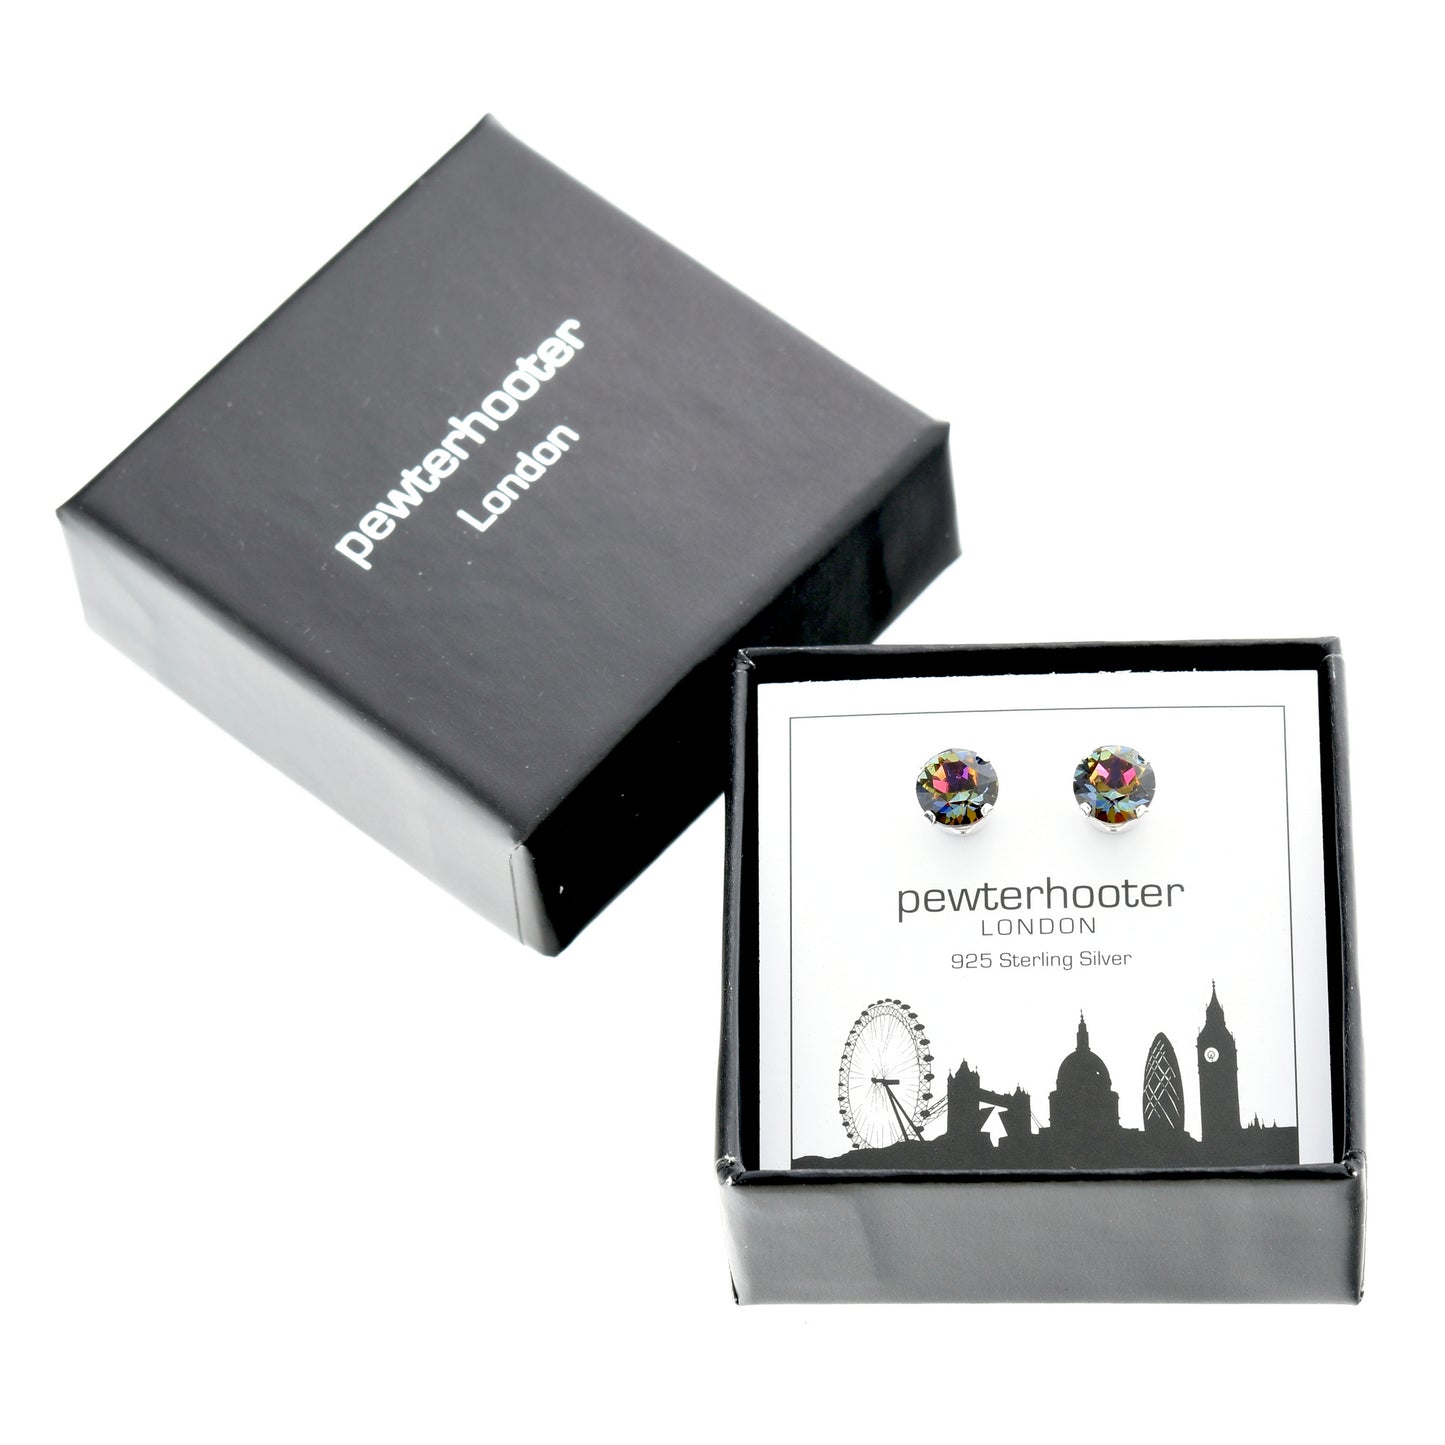 pewterhooter® Women's Classic Collection 925 Sterling silver earrings with sparkling Volcano crystals, packaged in a gift box for any occasion.